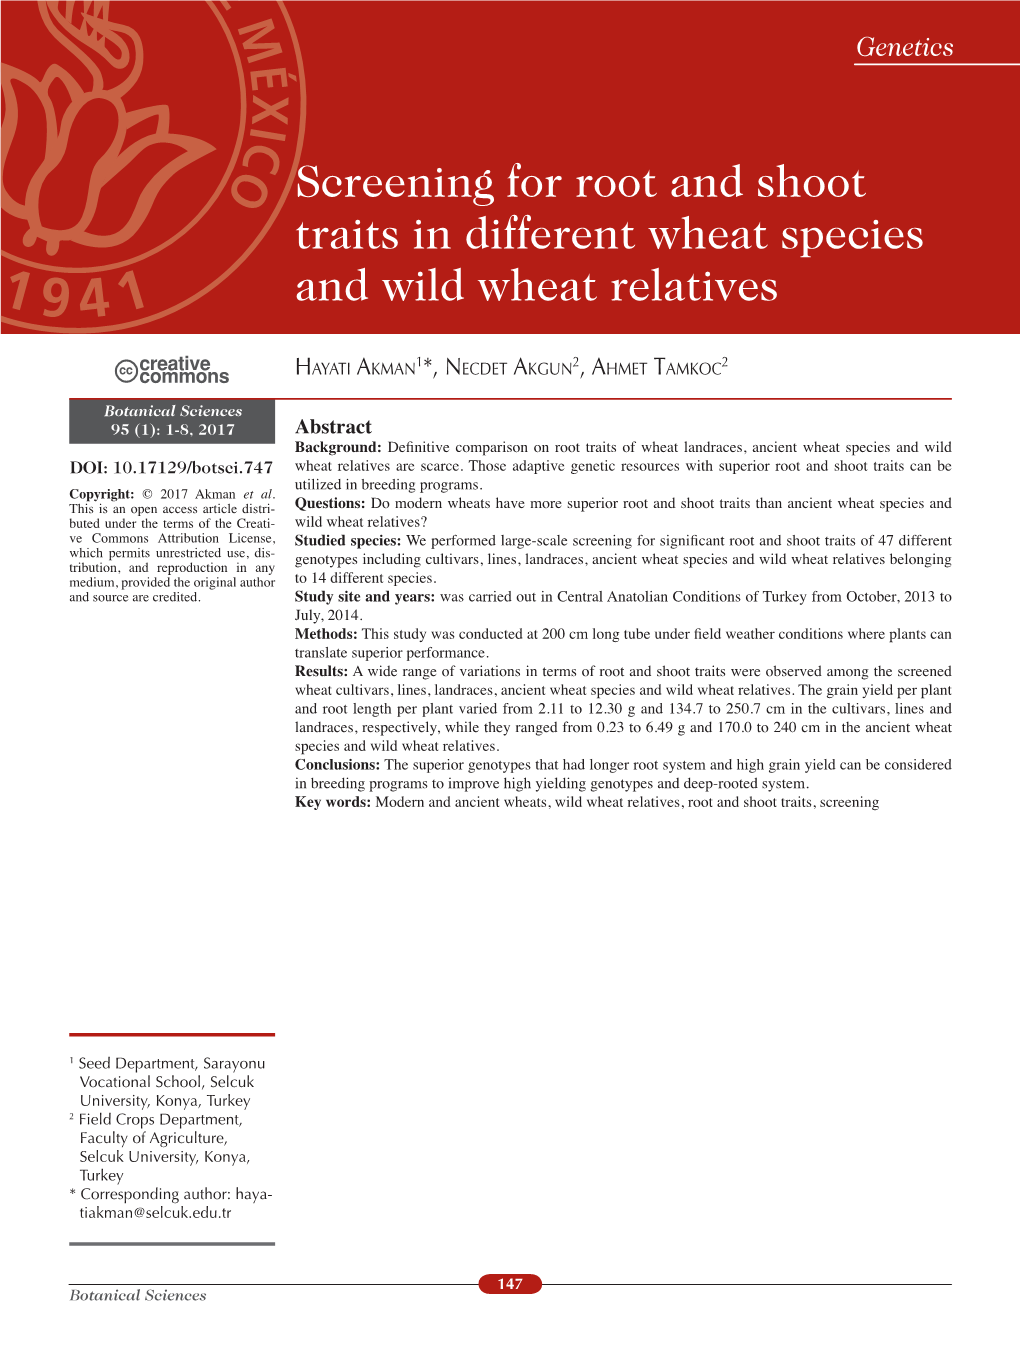 Abstract Background: Defnitive Comparison on Root Traits of Wheat Landraces, Ancient Wheat Species and Wild DOI: 10.17129/Botsci.747 Wheat Relatives Are Scarce